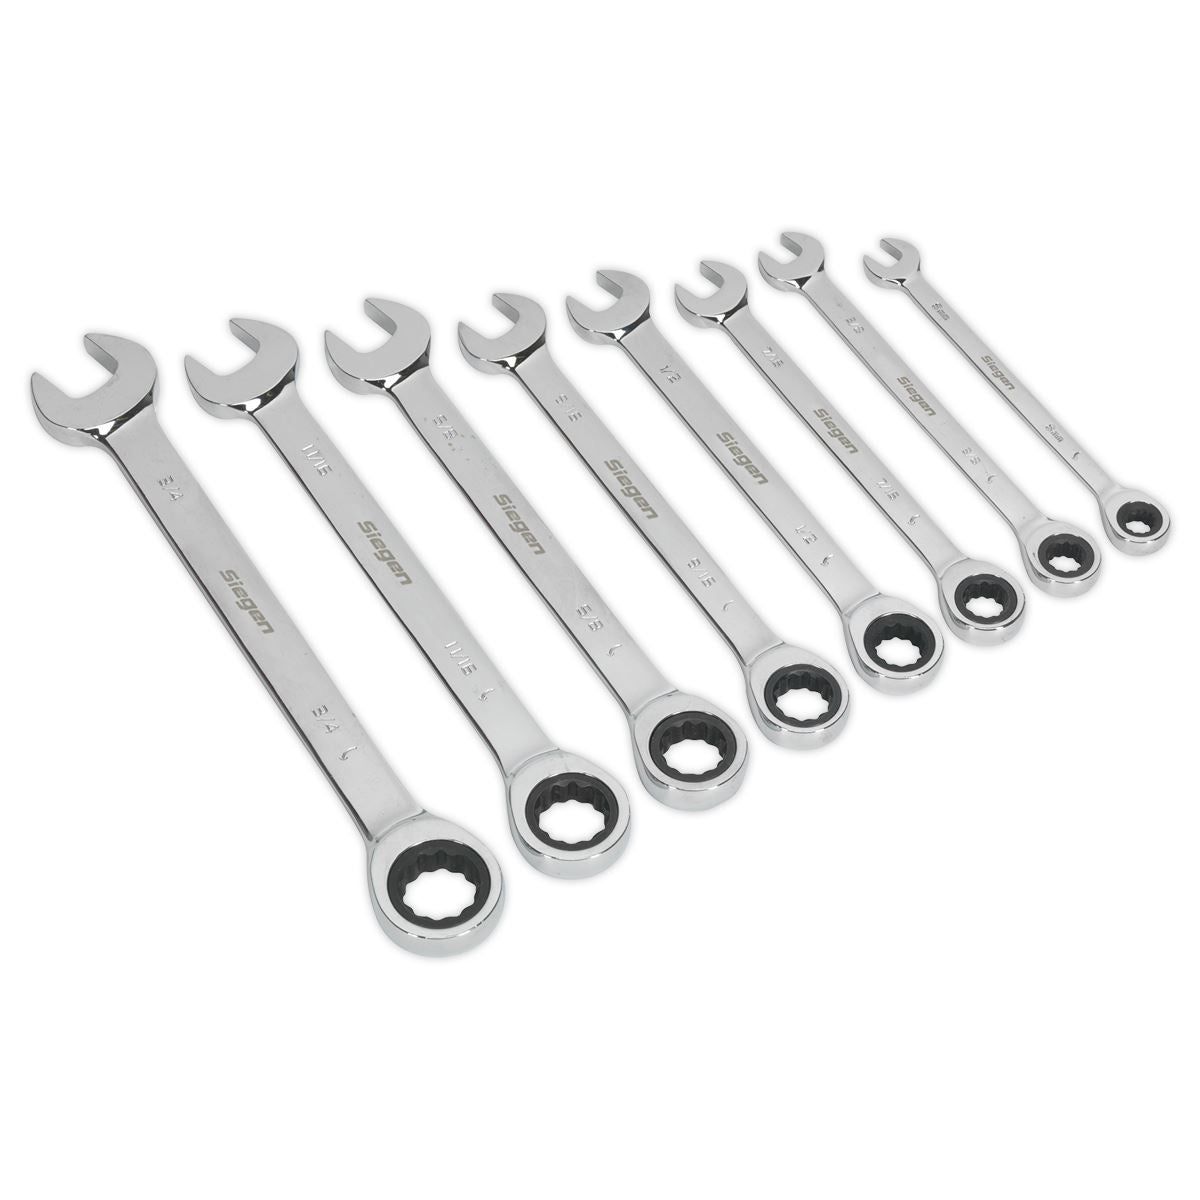 Siegen by Sealey Combination Ratchet Spanner Set 8pc Imperial